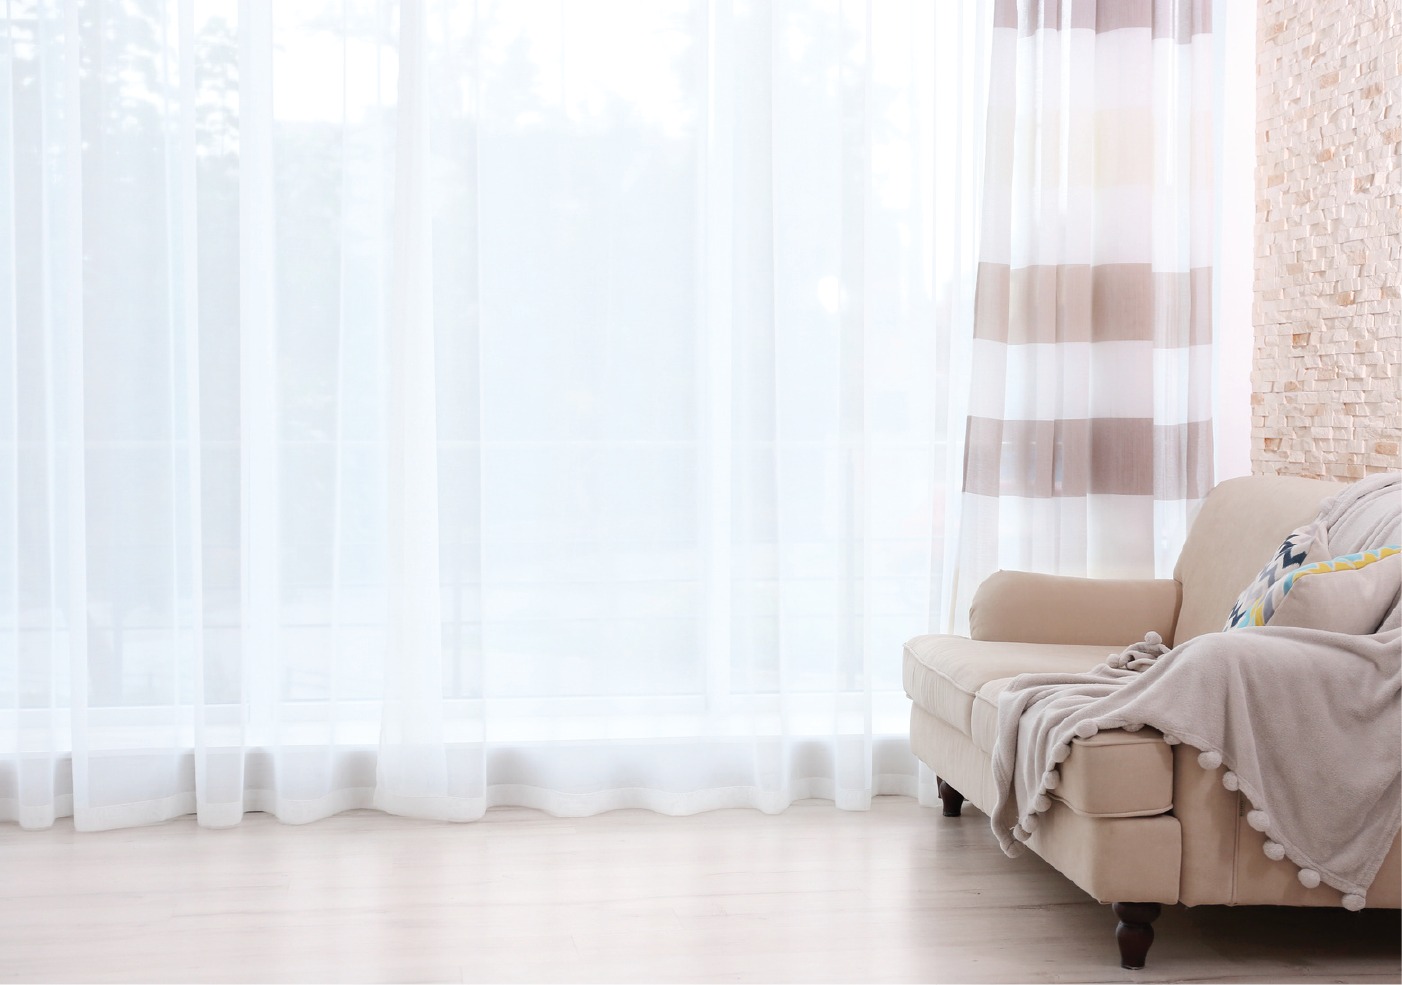 How Long Should Your Curtains Be